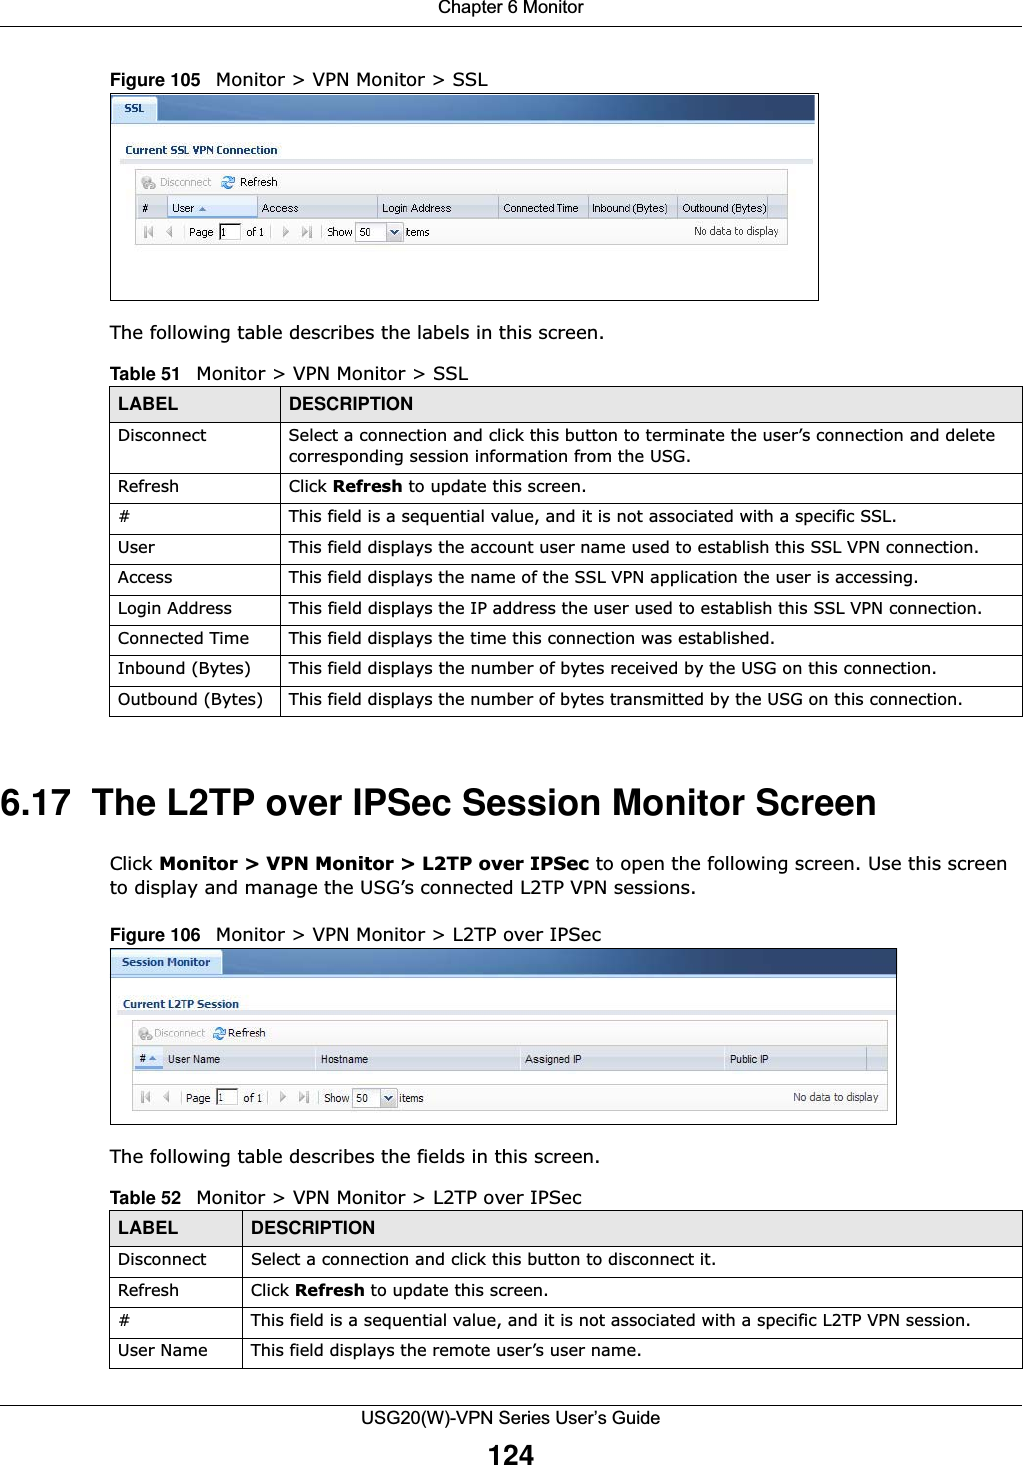 Chapter 6 MonitorUSG20(W)-VPN Series User’s Guide124Figure 105   Monitor &gt; VPN Monitor &gt; SSL The following table describes the labels in this screen. 6.17  The L2TP over IPSec Session Monitor ScreenClick Monitor &gt; VPN Monitor &gt; L2TP over IPSec to open the following screen. Use this screen to display and manage the USG’s connected L2TP VPN sessions. Figure 106   Monitor &gt; VPN Monitor &gt; L2TP over IPSecThe following table describes the fields in this screen.  Table 51   Monitor &gt; VPN Monitor &gt; SSLLABEL DESCRIPTIONDisconnect Select a connection and click this button to terminate the user’s connection and delete corresponding session information from the USG. Refresh Click Refresh to update this screen. # This field is a sequential value, and it is not associated with a specific SSL.User This field displays the account user name used to establish this SSL VPN connection. Access This field displays the name of the SSL VPN application the user is accessing. Login Address This field displays the IP address the user used to establish this SSL VPN connection.Connected Time This field displays the time this connection was established. Inbound (Bytes) This field displays the number of bytes received by the USG on this connection. Outbound (Bytes) This field displays the number of bytes transmitted by the USG on this connection. Table 52   Monitor &gt; VPN Monitor &gt; L2TP over IPSecLABEL DESCRIPTIONDisconnect Select a connection and click this button to disconnect it.Refresh Click Refresh to update this screen. # This field is a sequential value, and it is not associated with a specific L2TP VPN session.User Name This field displays the remote user’s user name.